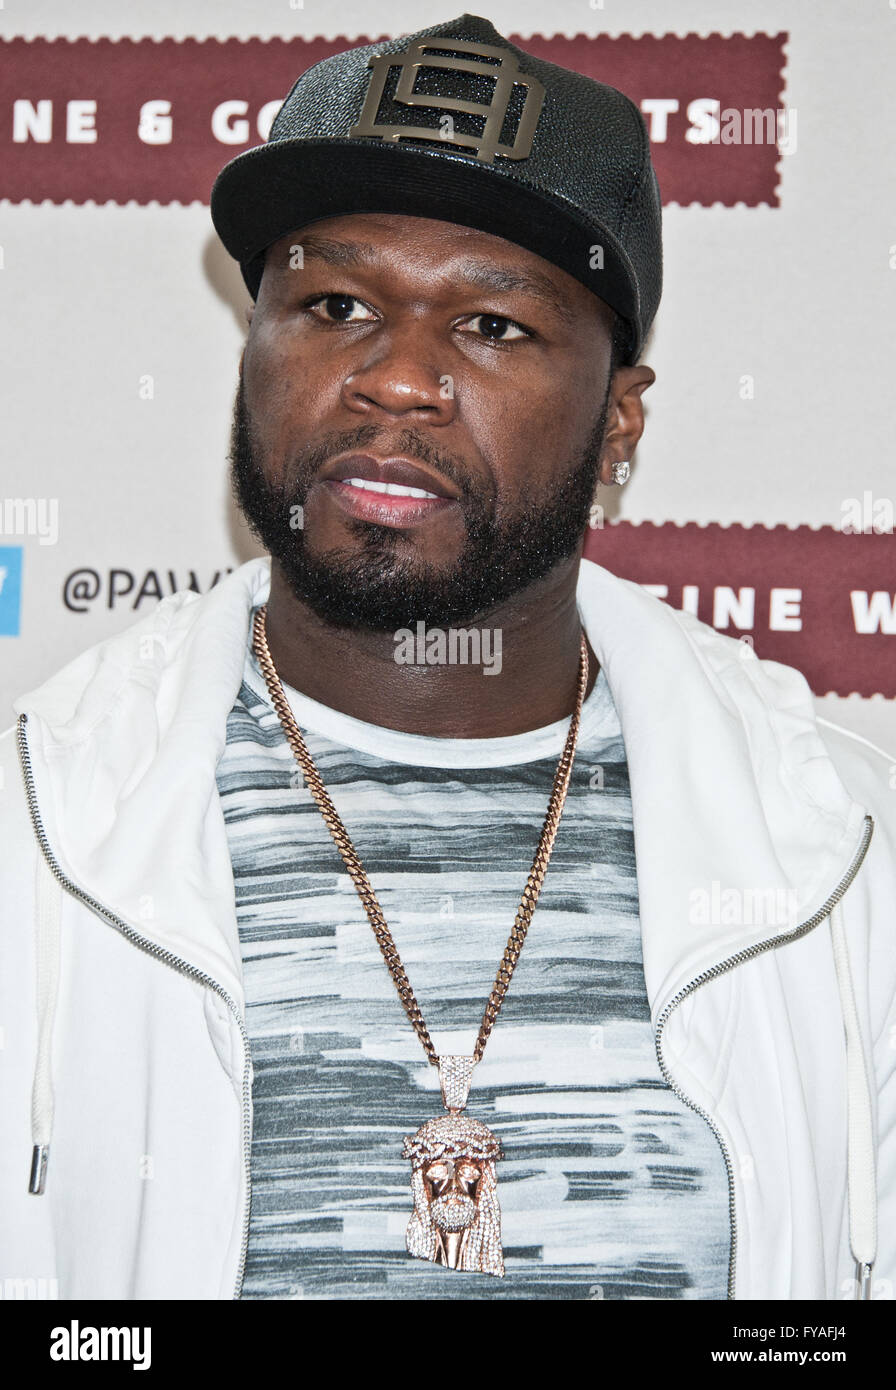 Philadelphia, PA, USA. 23rd April, 2016. 50 Cent EFFEN Vodka Bottle Signing at PA Fine Wine and Good Spirits Store. Stock Photo